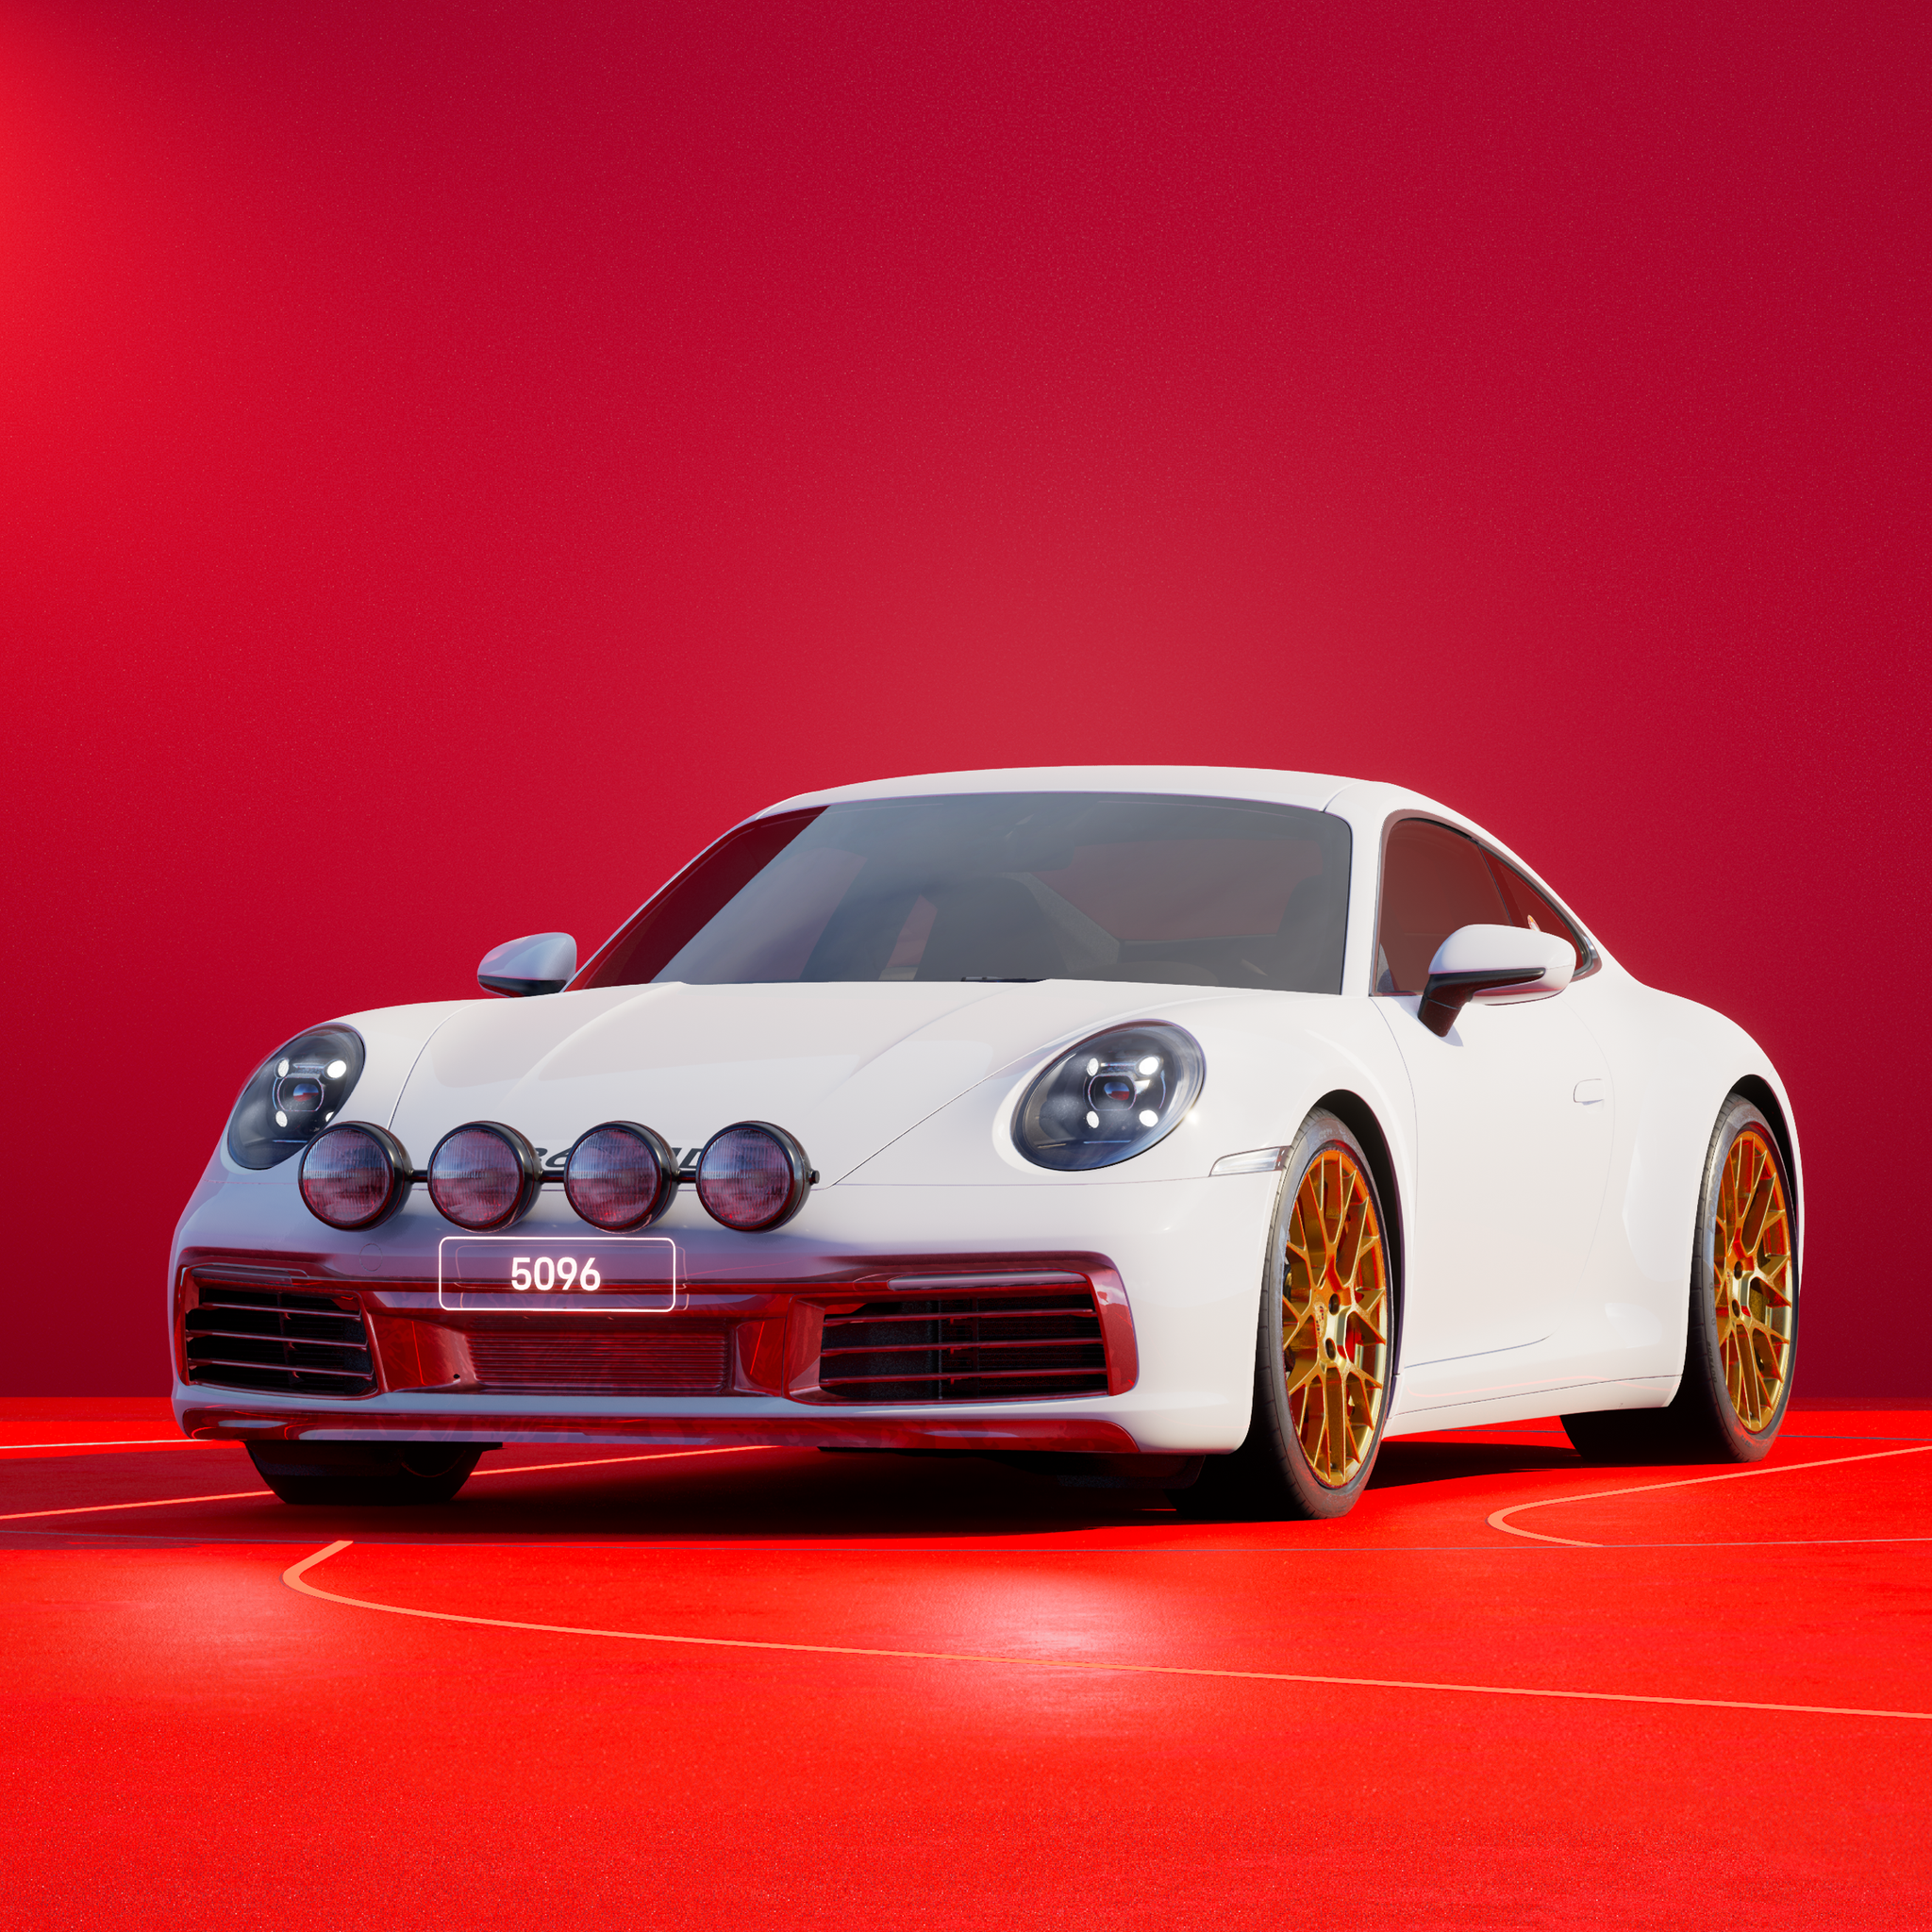 The PORSCHΞ 911 5096 image in phase